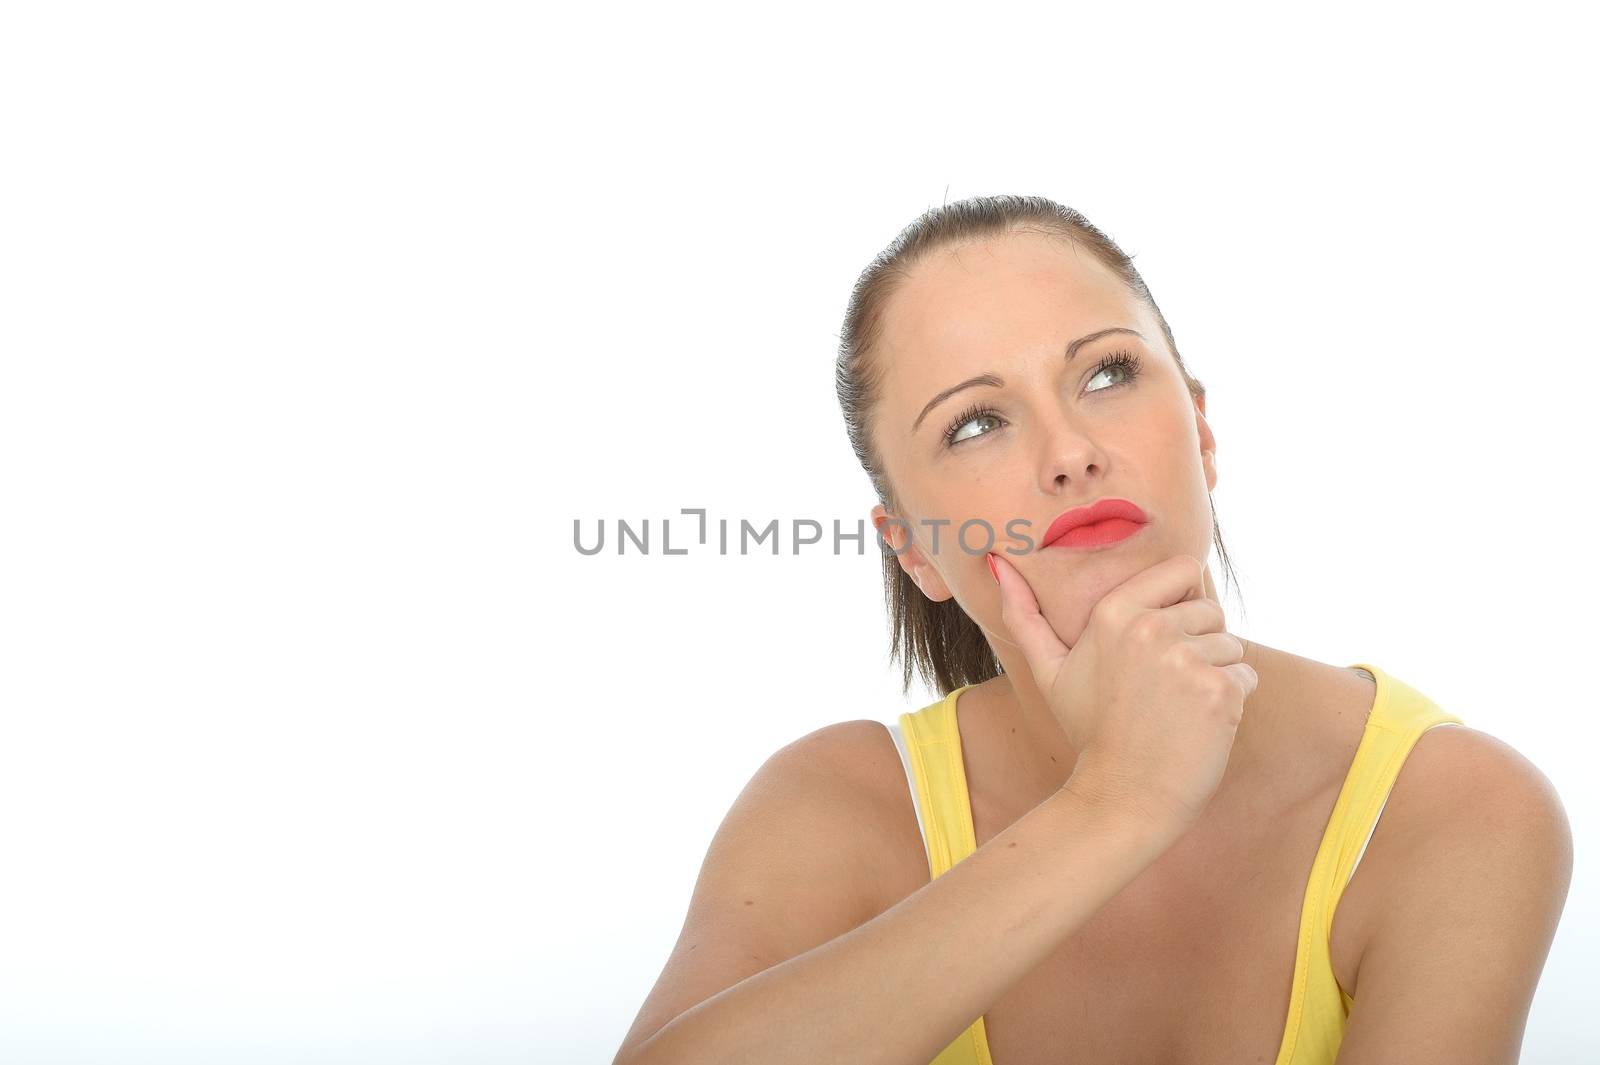 Portrait of a Young Woman Thinking or Pondering a Problem by Whiteboxmedia